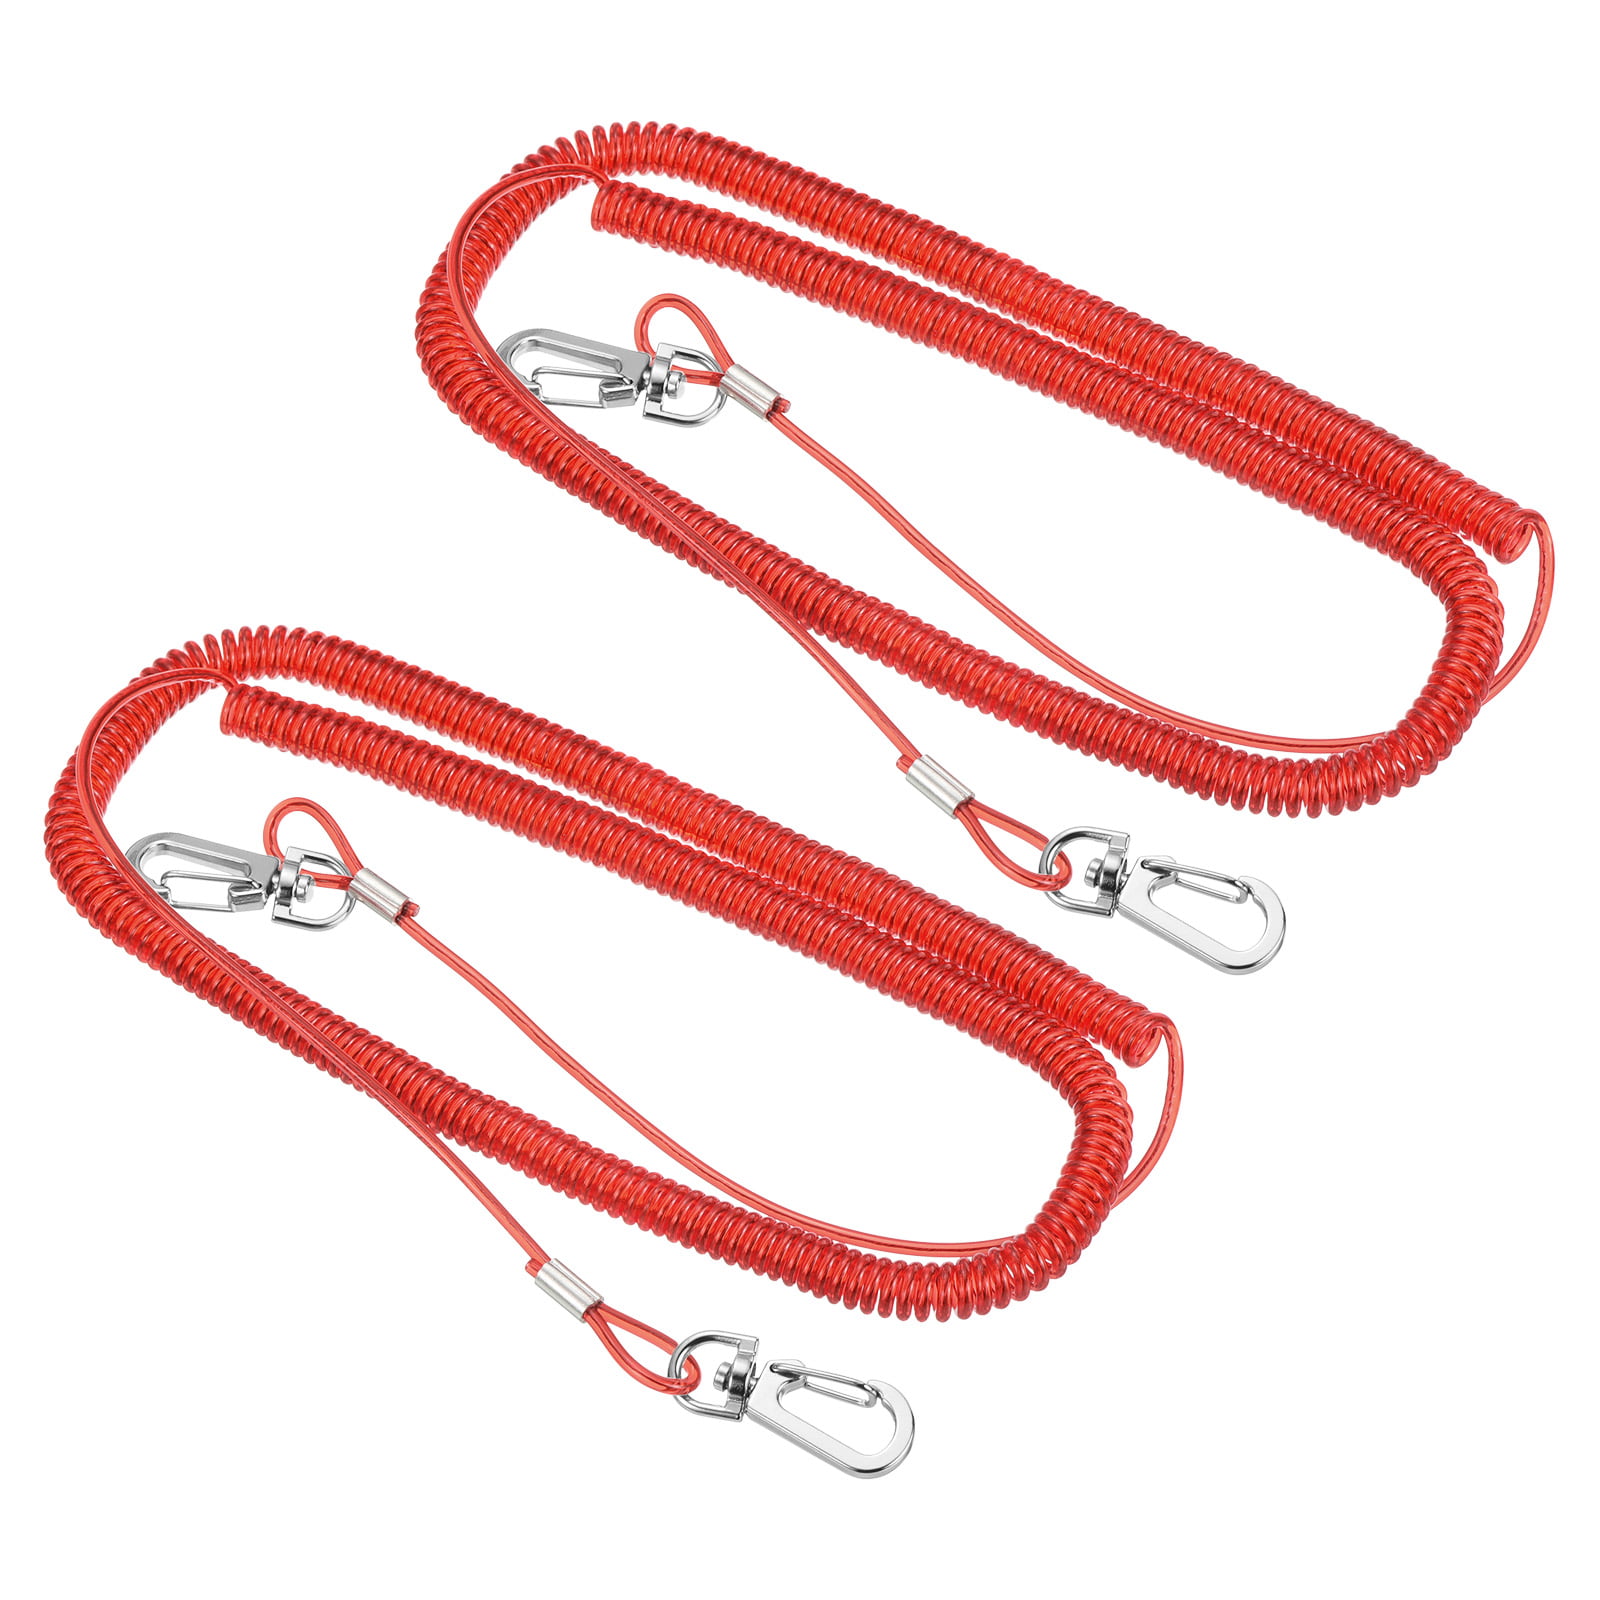 Uxcell 16.4ft Heavy Spring Fishing Coiled Lanyard Extension Cord